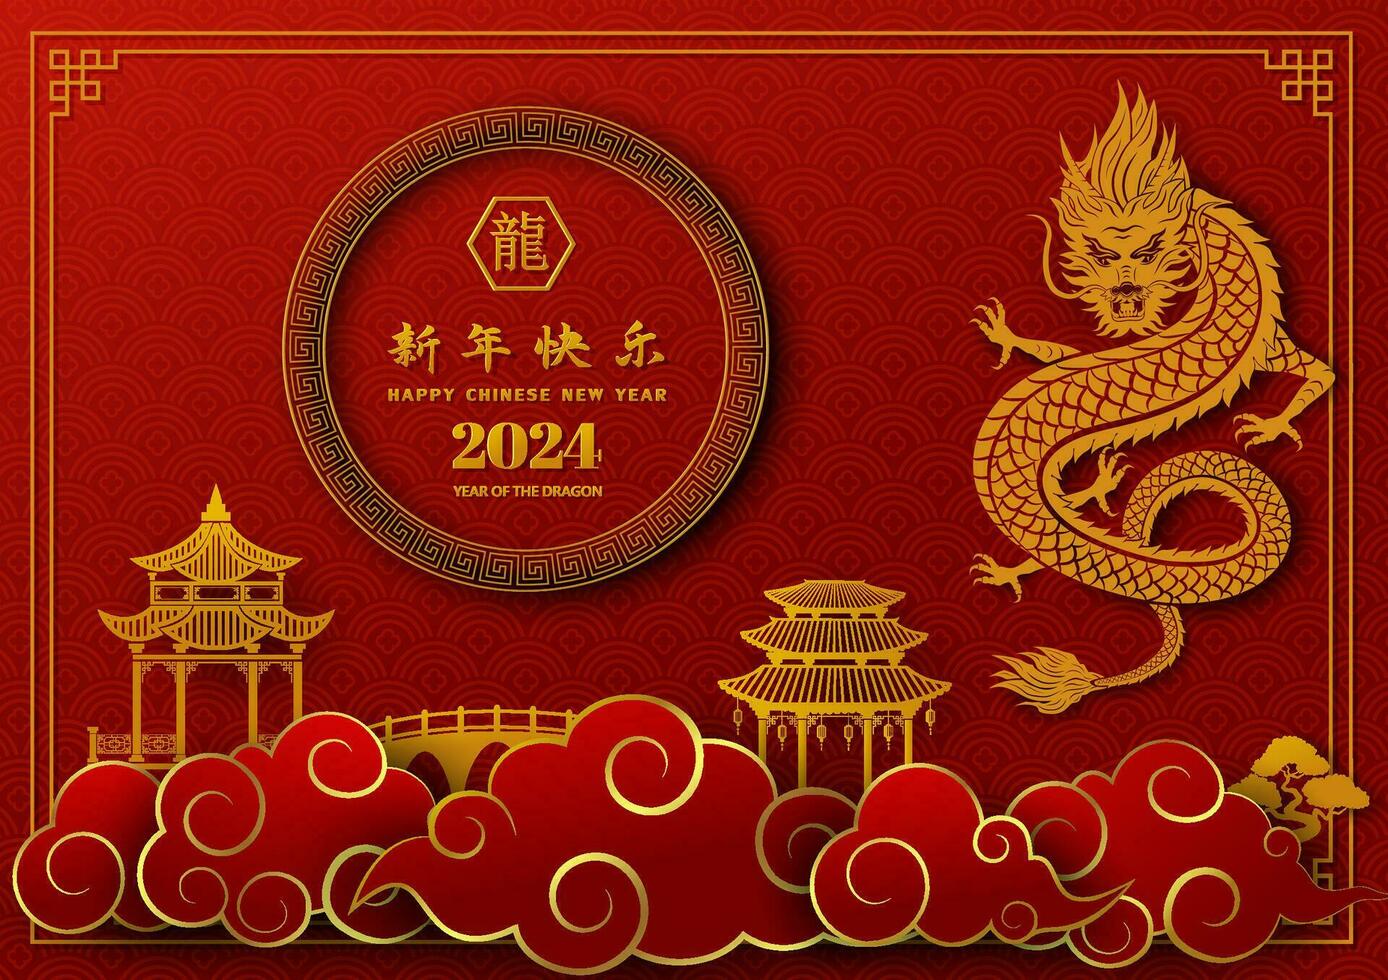 Happy Chinese new year 2024,zodiac sign for the year of dragon,Chinese translate mean happy new year 2024,year of the dragon vector